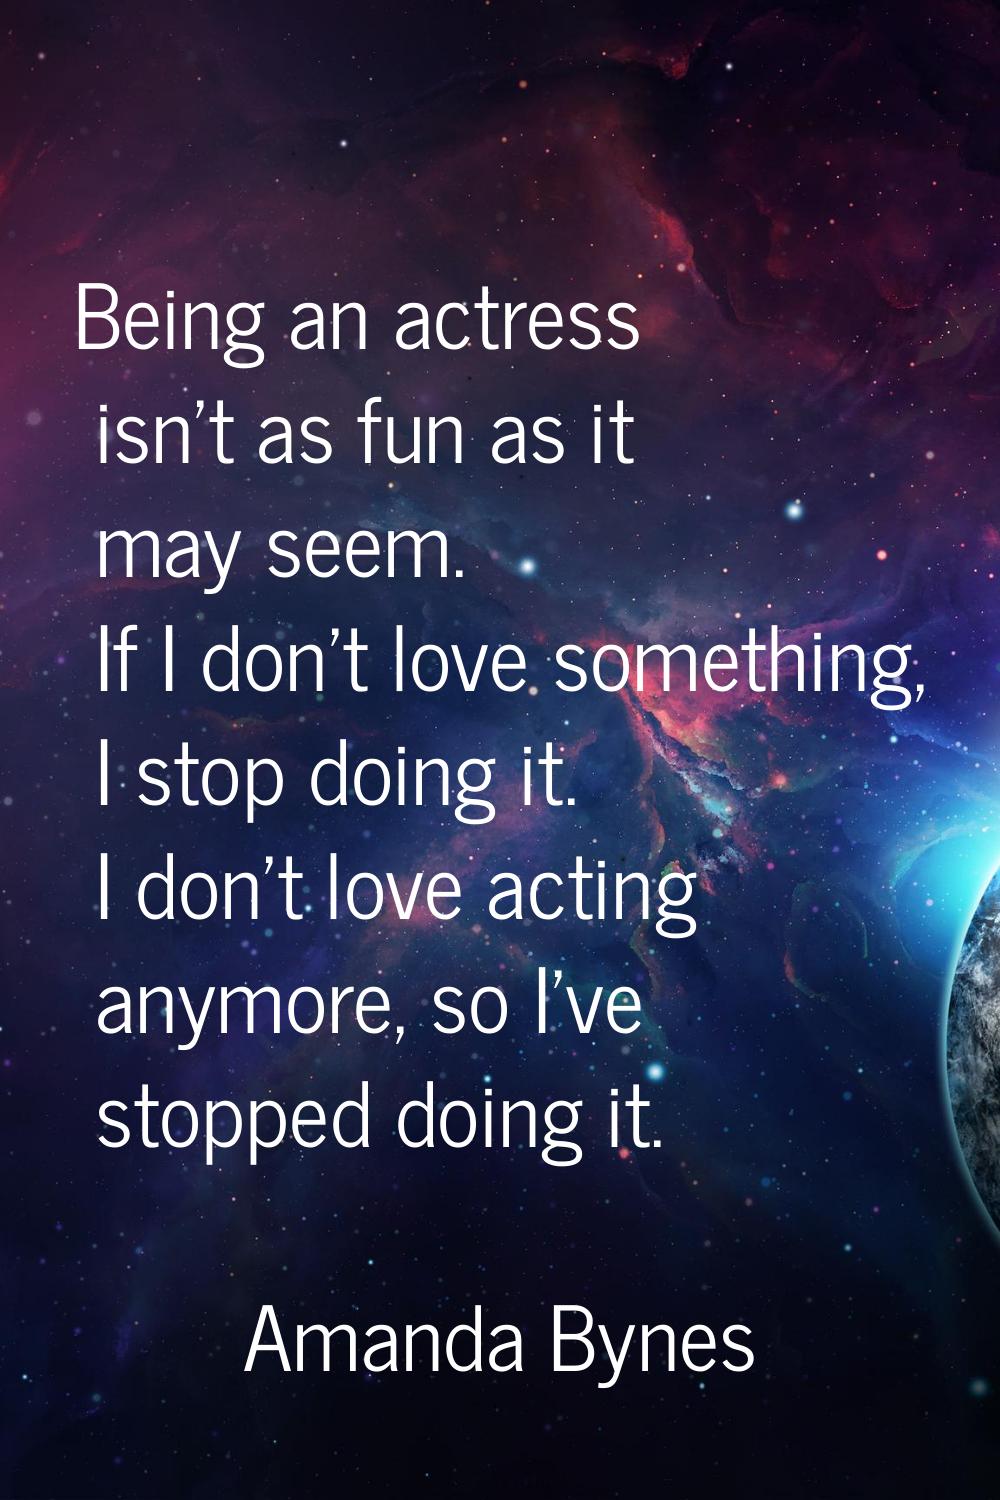 Being an actress isn't as fun as it may seem. If I don't love something, I stop doing it. I don't l